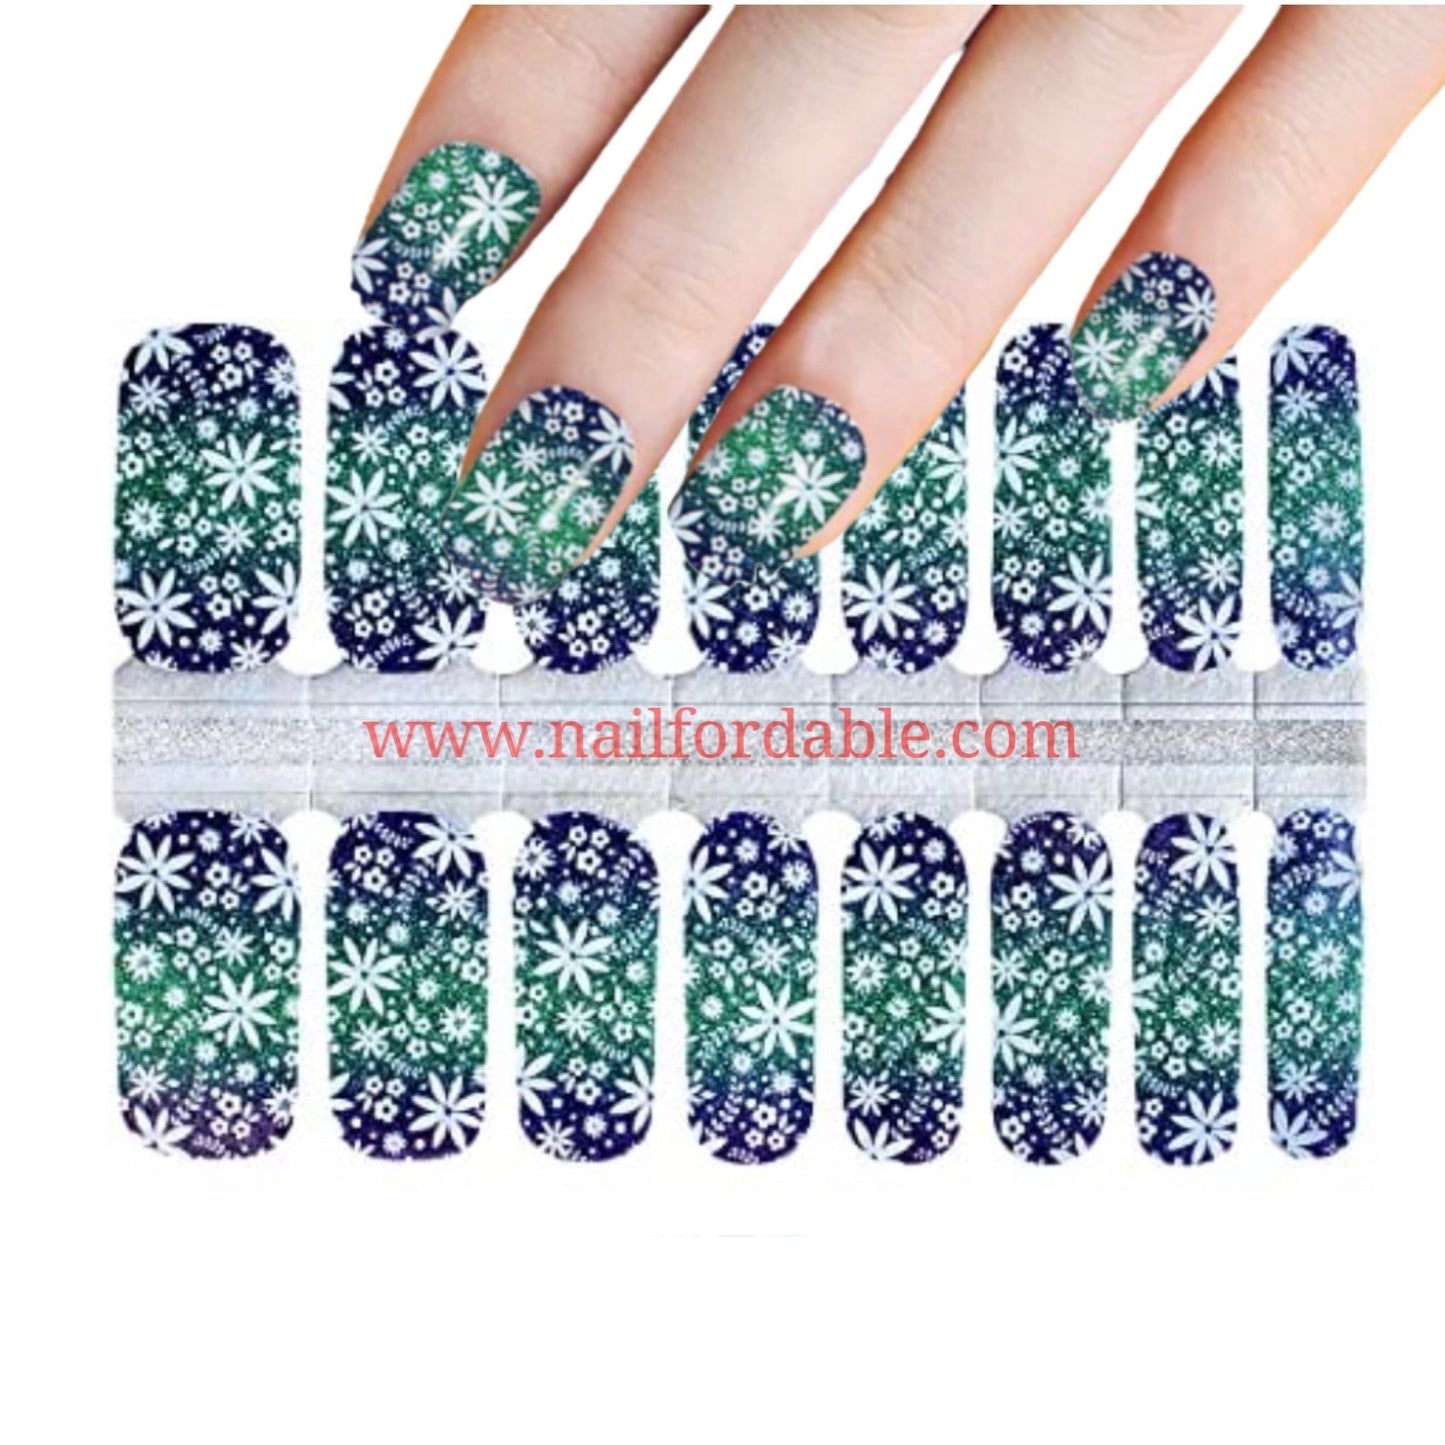 Almost Christmas! Nail Wraps | Semi Cured Gel Wraps | Gel Nail Wraps |Nail Polish | Nail Stickers